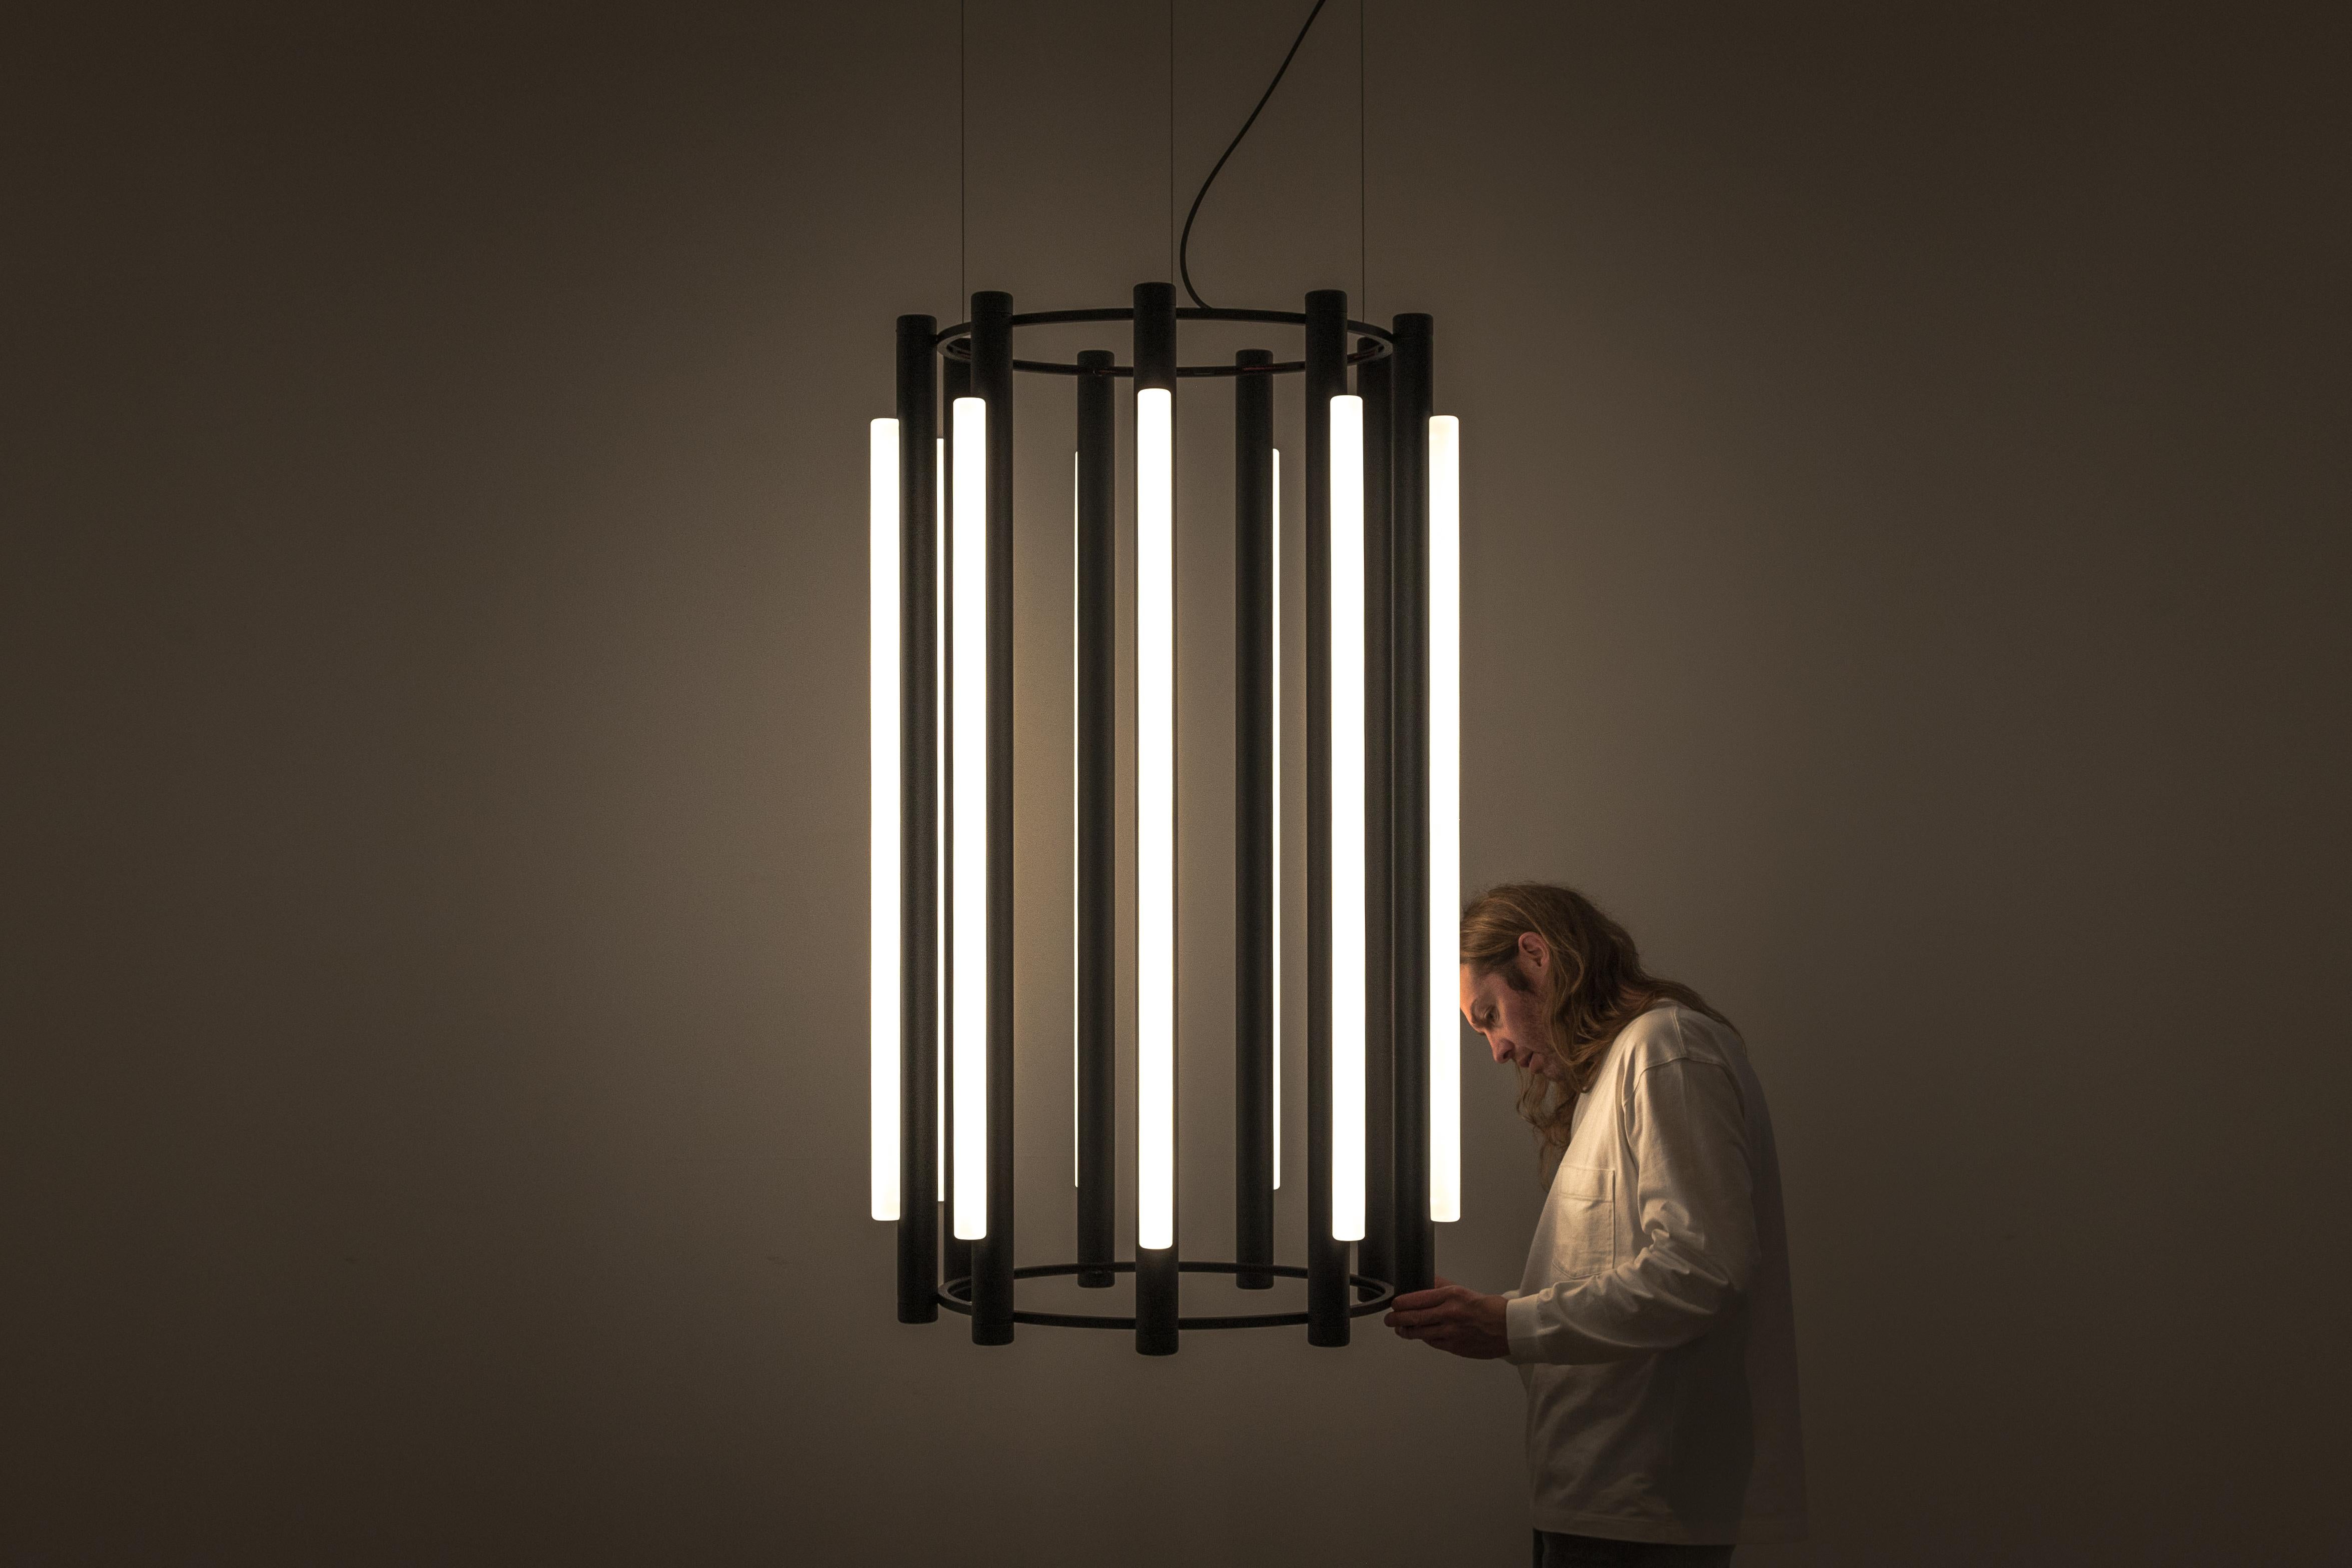 Pipeline chandelier 5
Design: Caine Heintzman, Editor: AND Light

By definition, the Pipeline Chandelier features a cylindrical arrangement of linear illuminated sections cinched by metal hoops. Its carousel like form proposes an unconventional